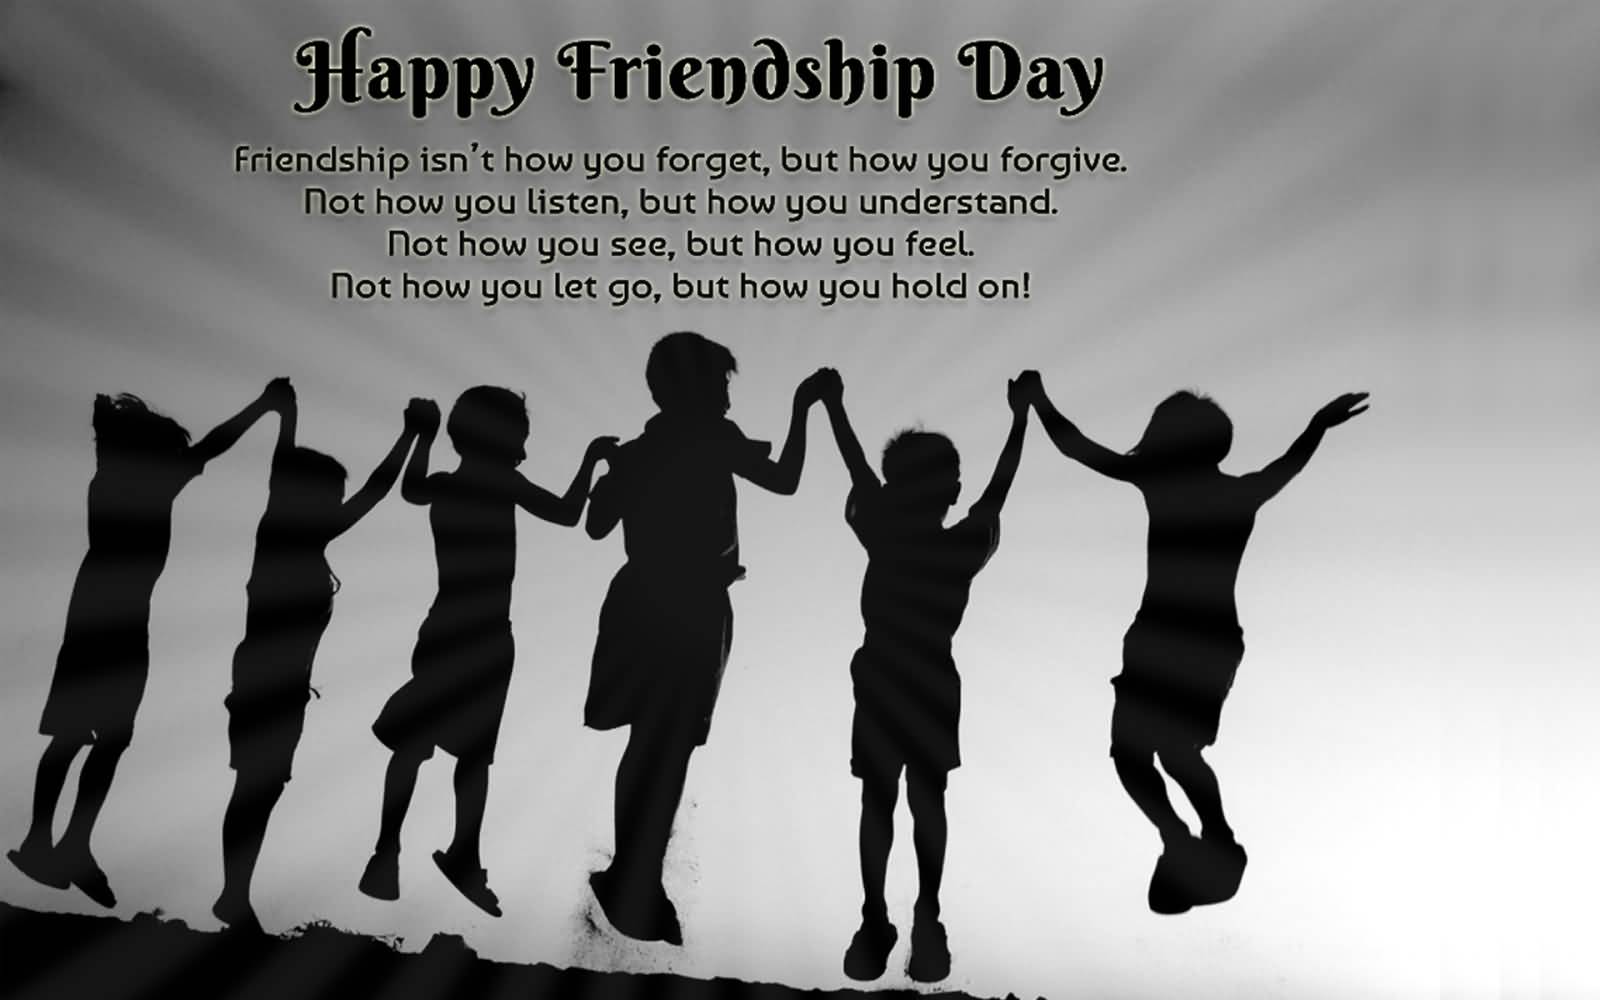 Happy Friendship Day Friendship Isn't How You Forget, But How You Forgive.